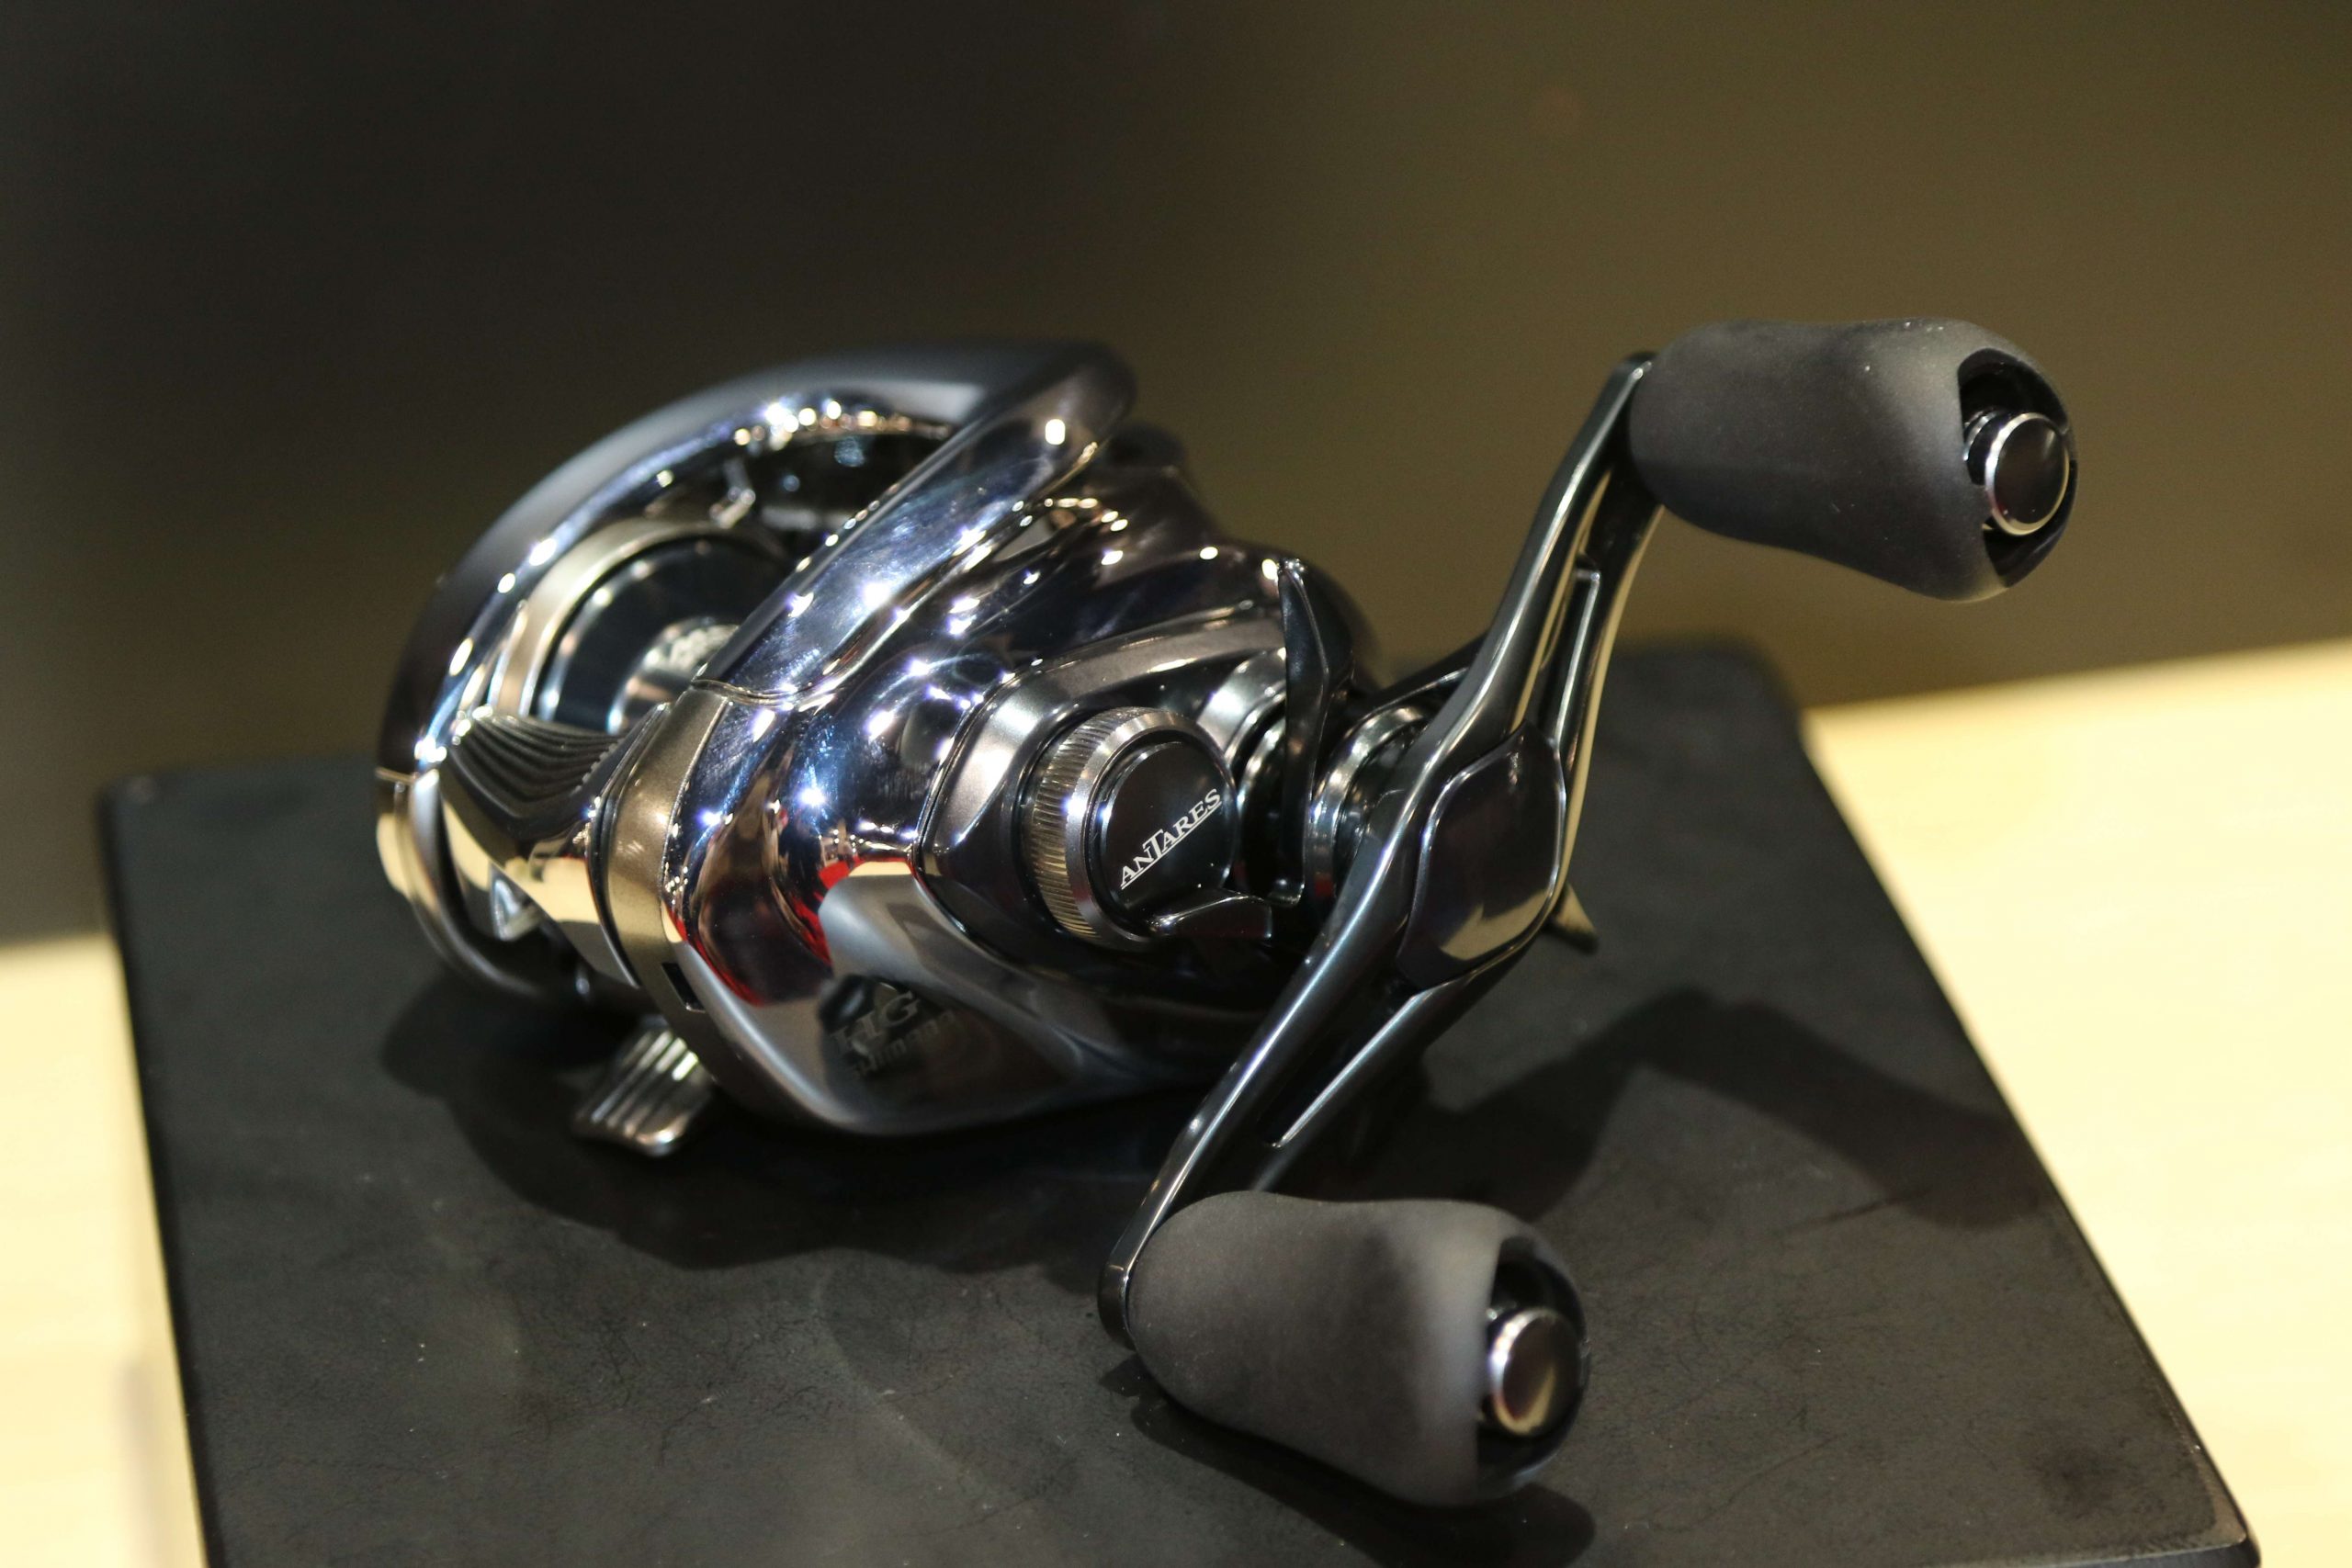 New from Shimano is the lighter Antares baitcaster in a 70 size.